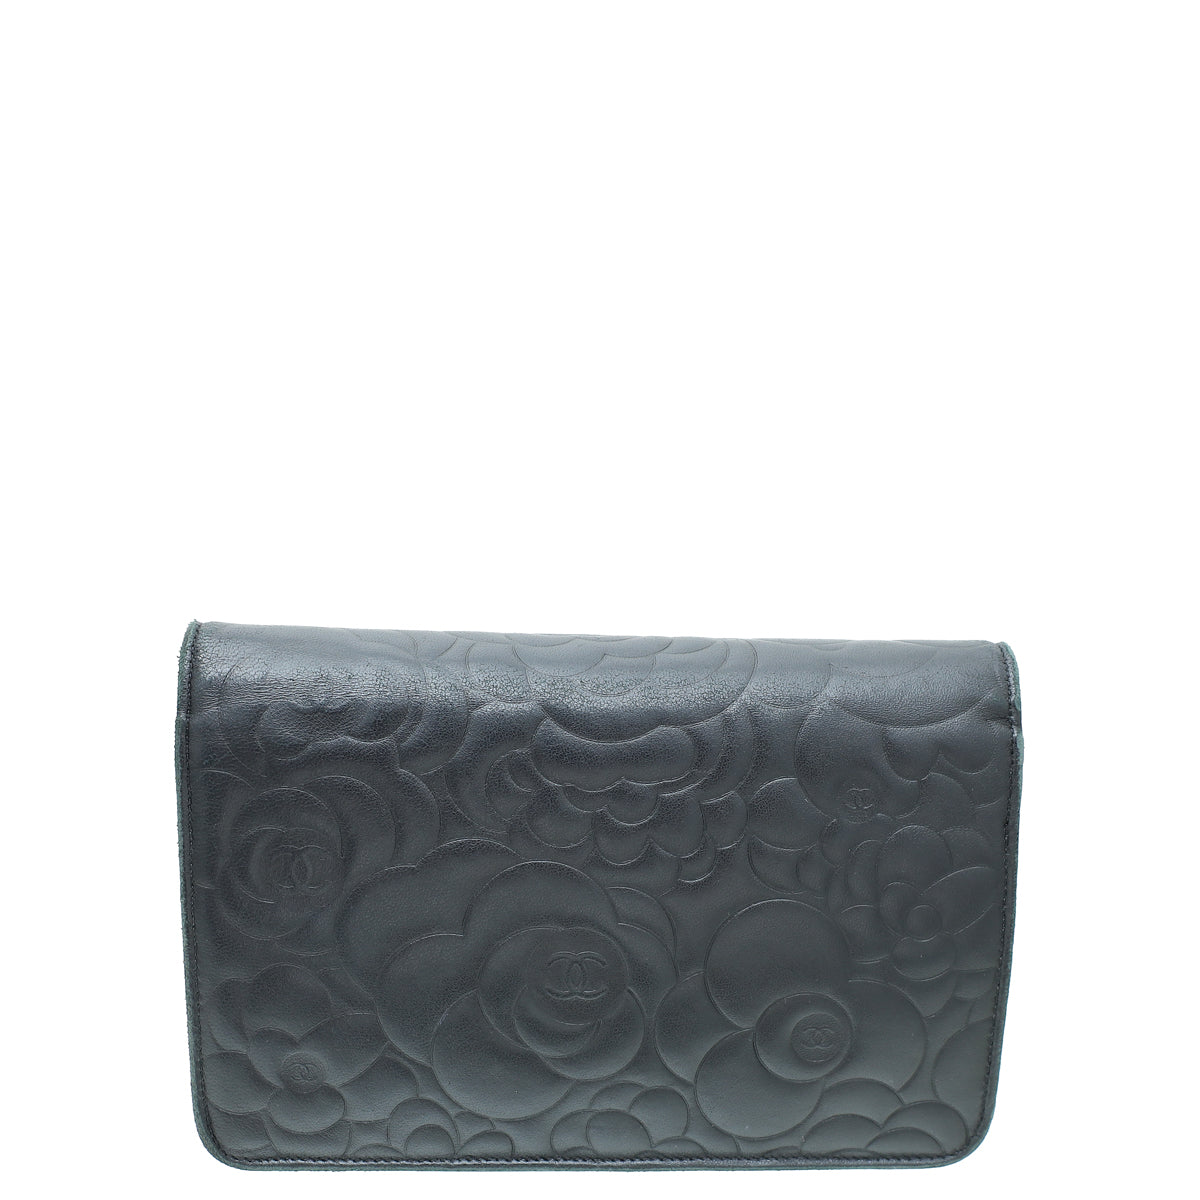 Chanel Black CC Camellia Flower Wallet On Chain